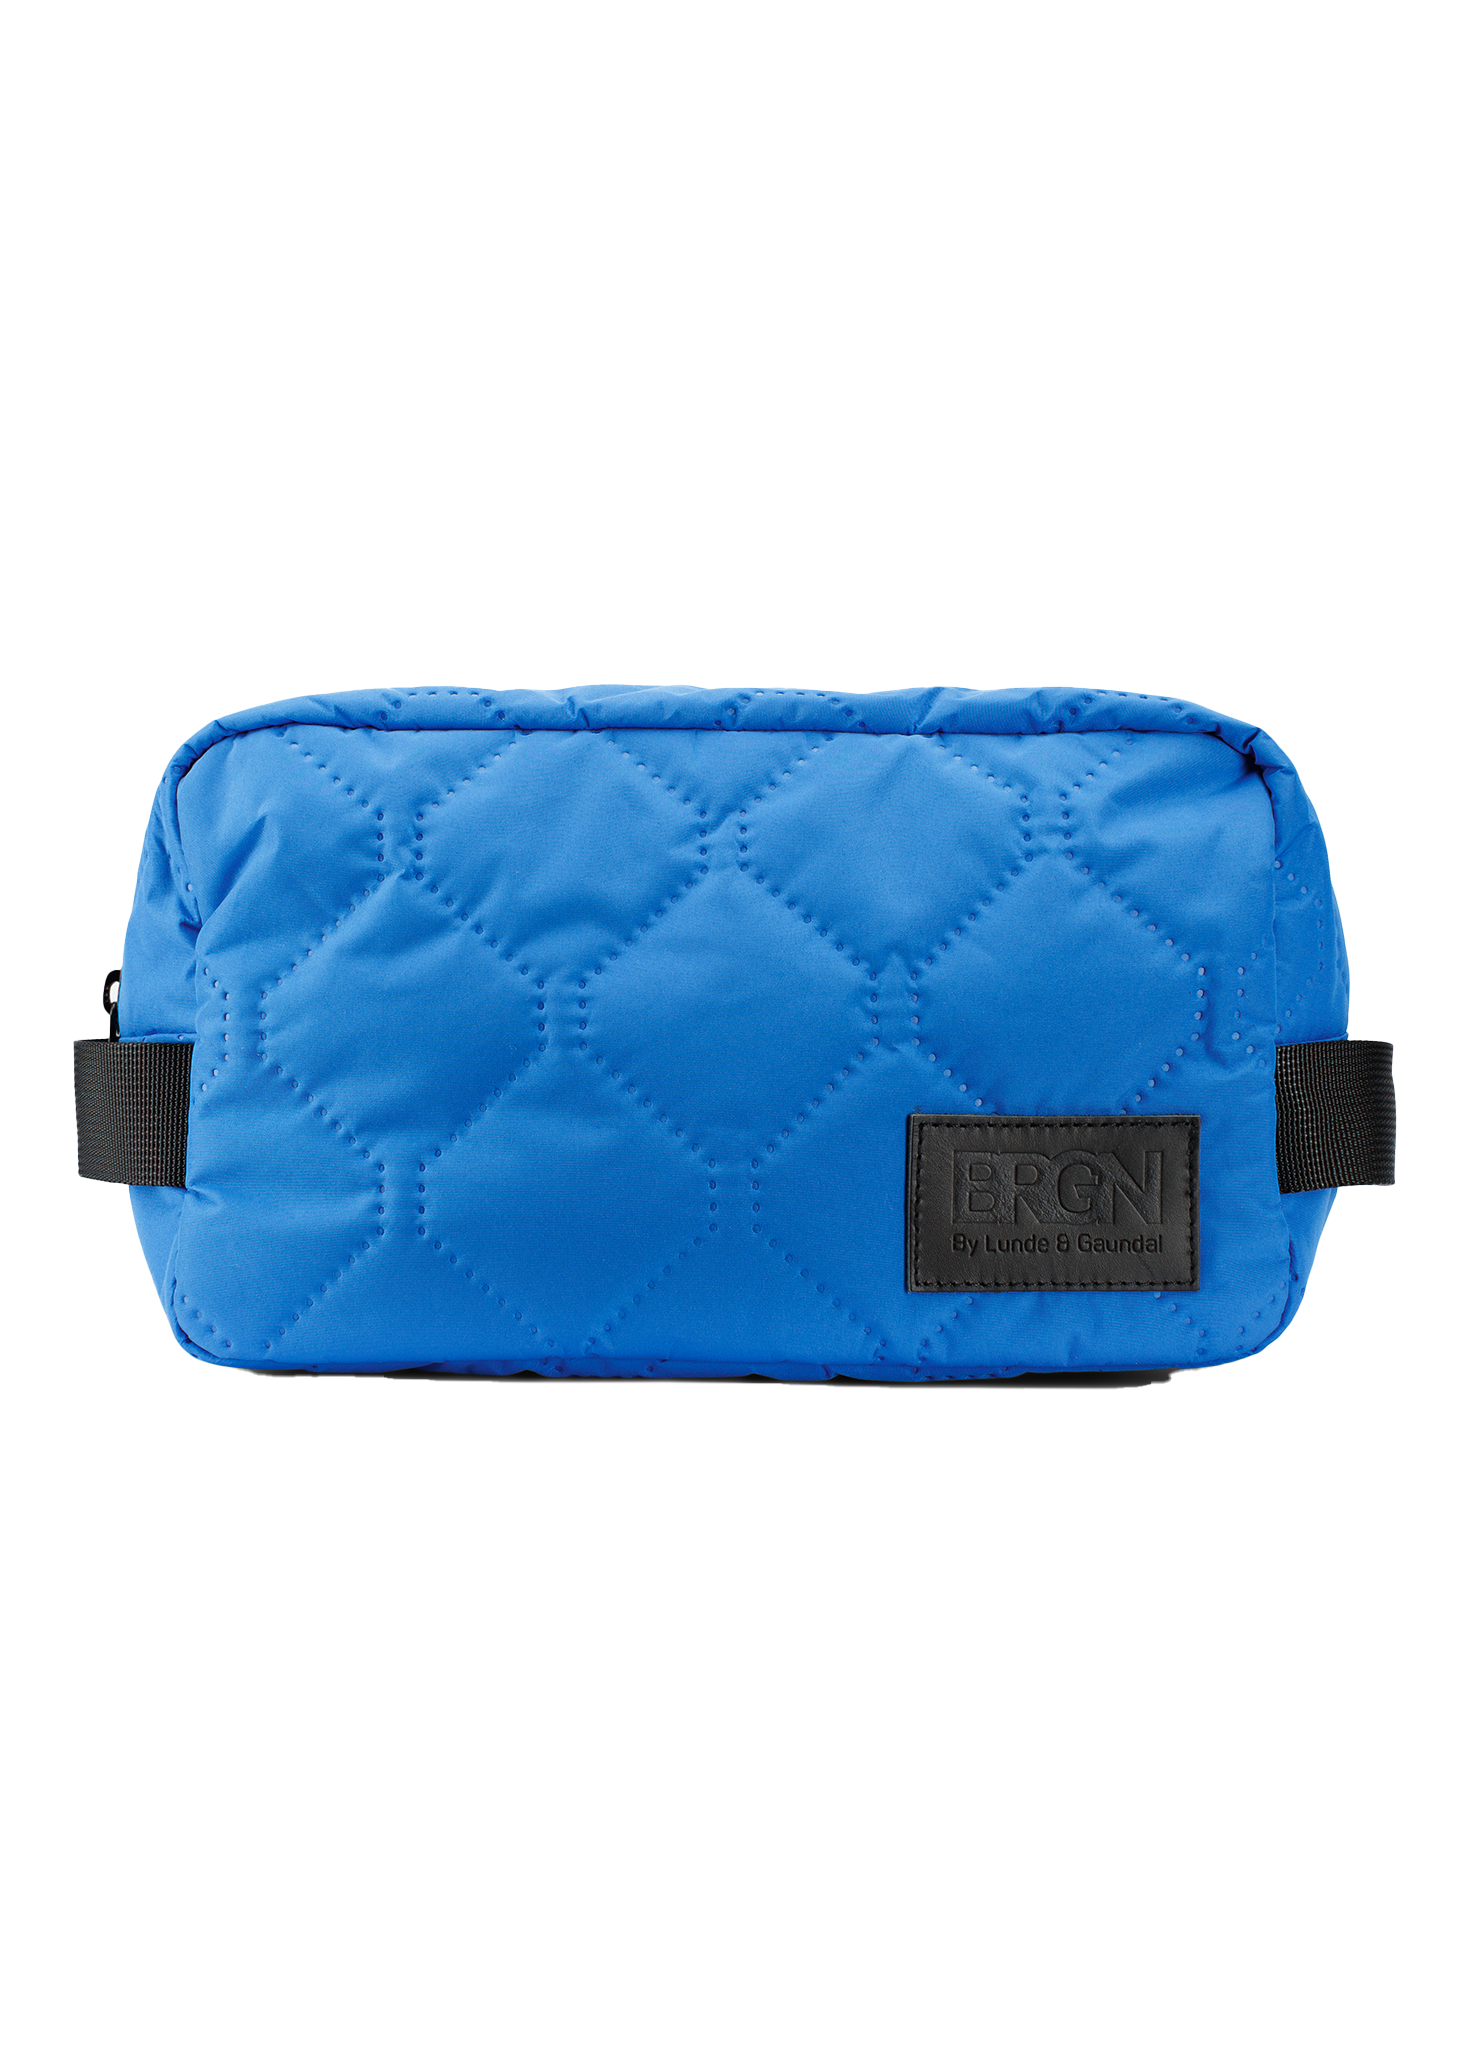 BRGN by Lunde & Gaundal Medium toiletry bag Accessories 745 Palace Blue